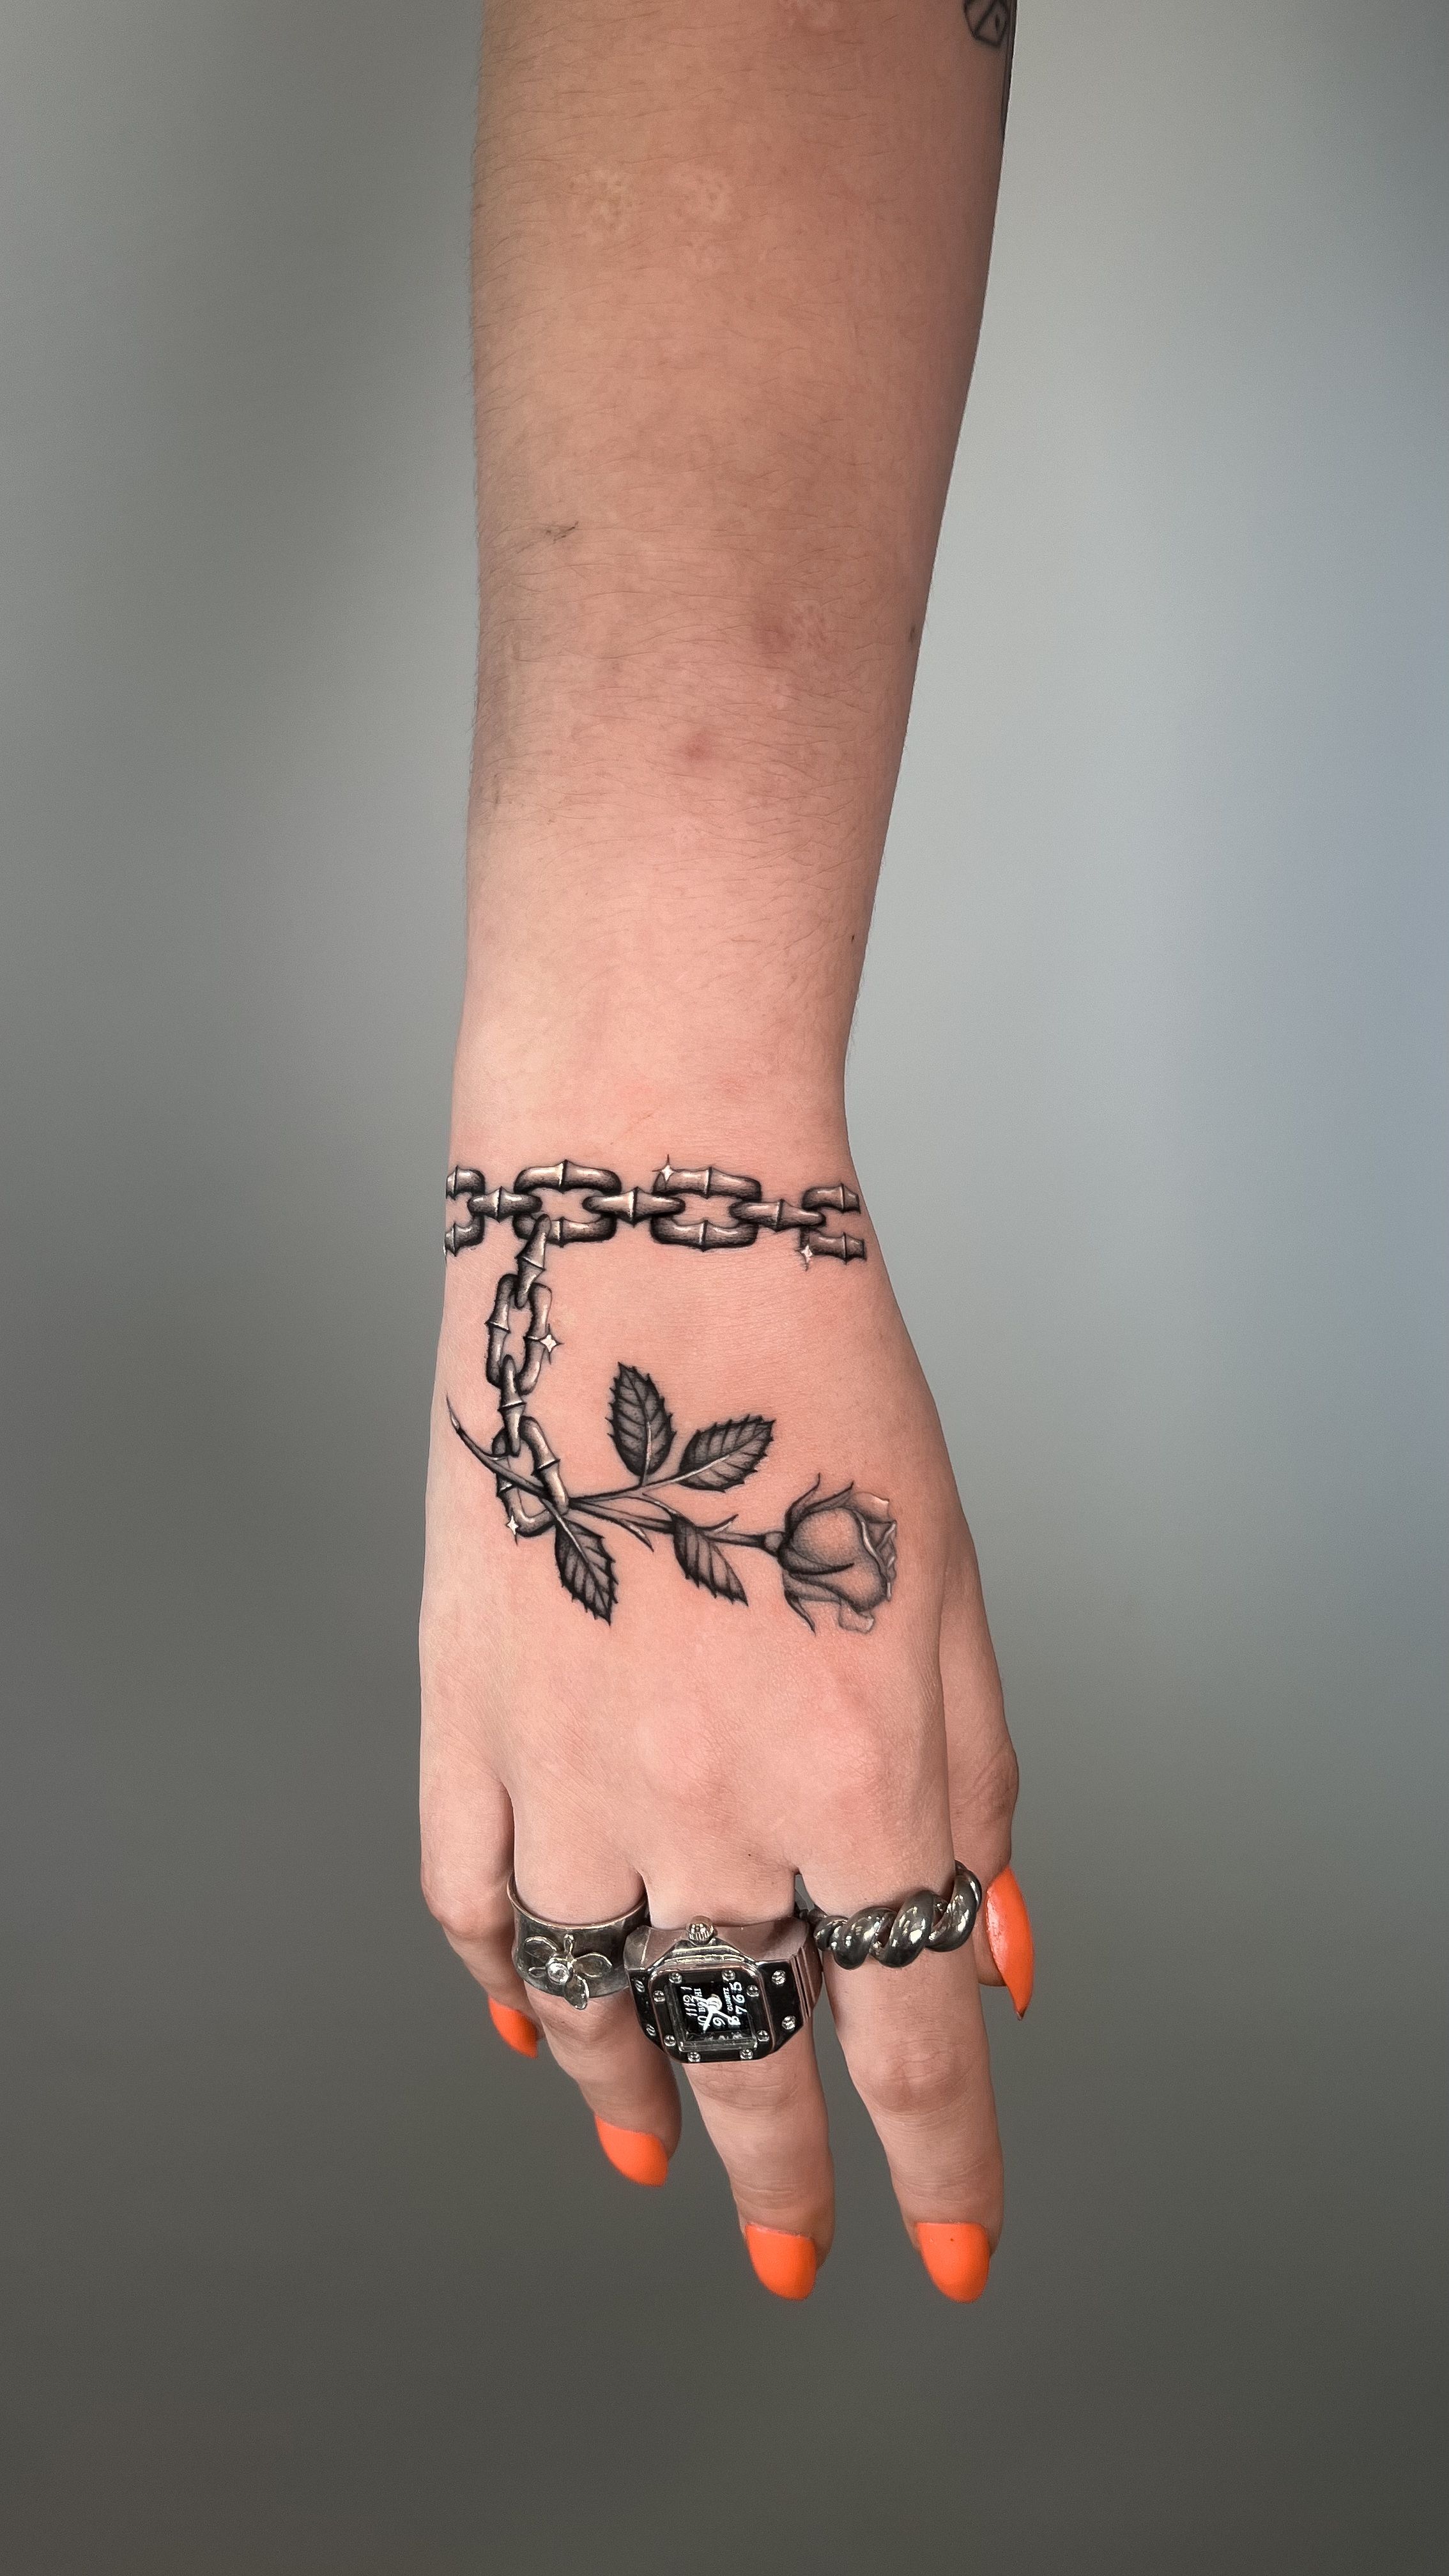 25 Awesome Small Wrist Tattoo Ideas For Men - Styleoholic